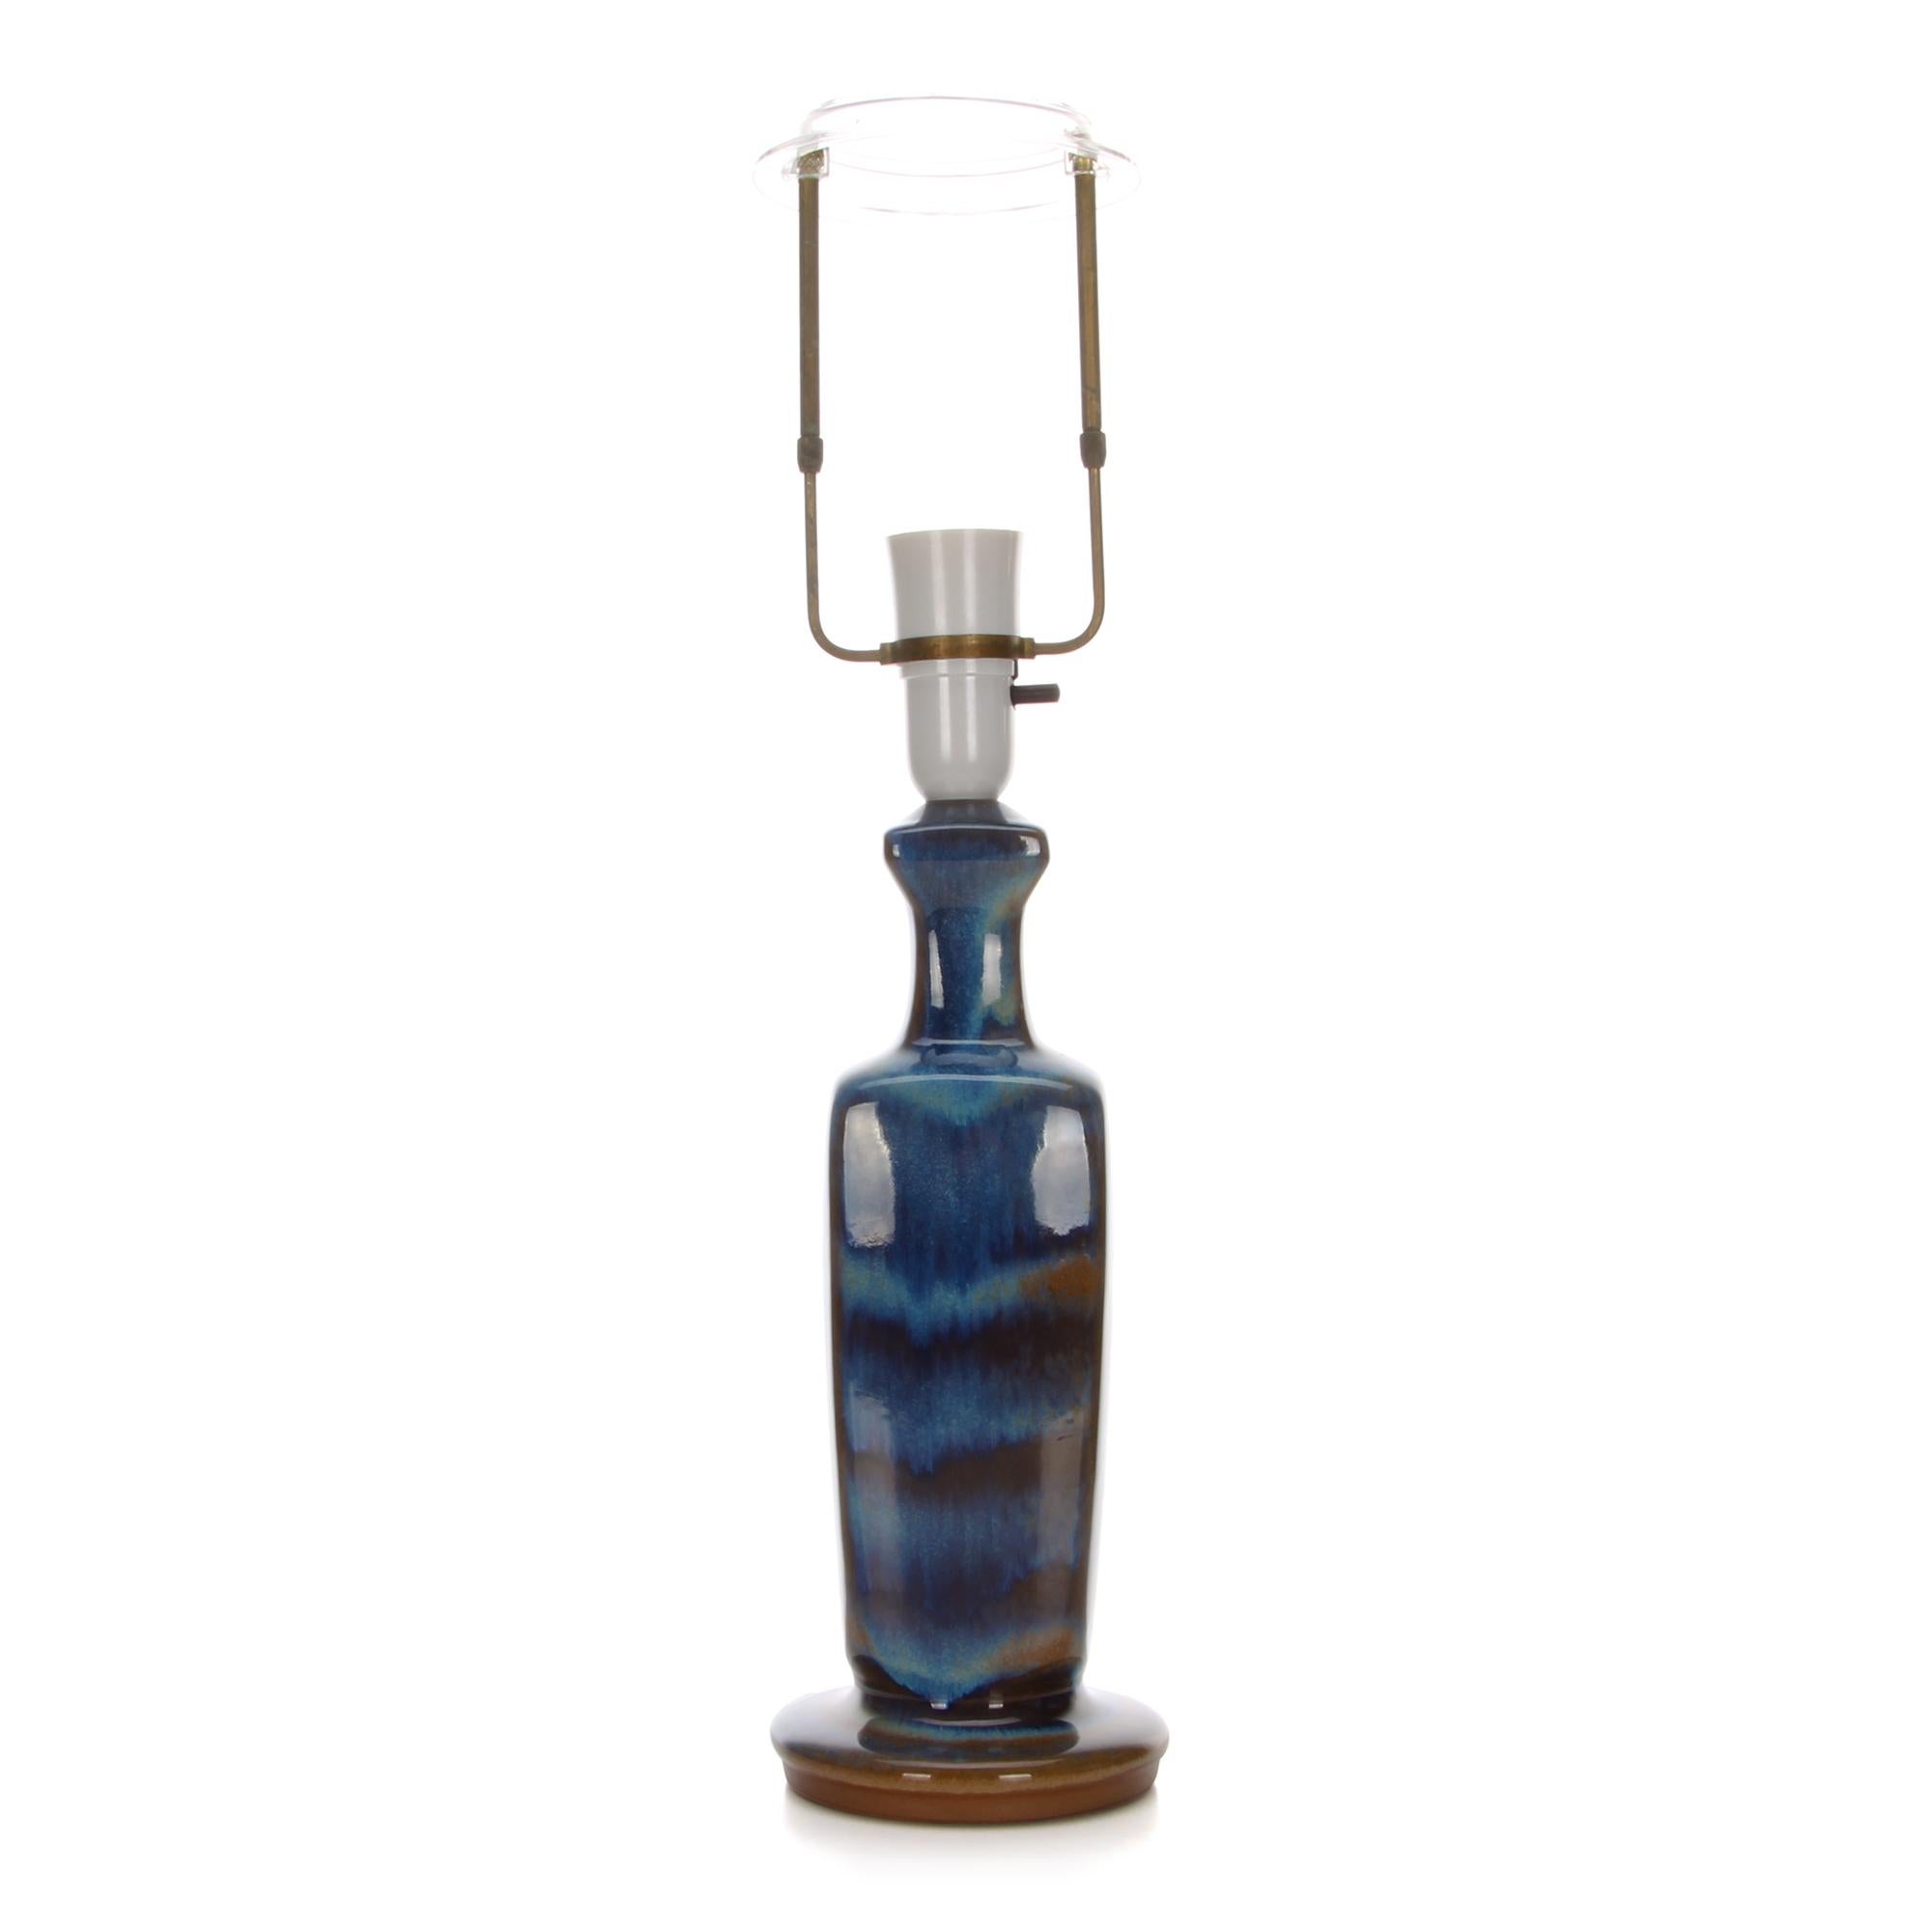 Mid-20th Century Blue Table Lamp by Michael Andersen & Son 1960s, with Vintage Shade Included